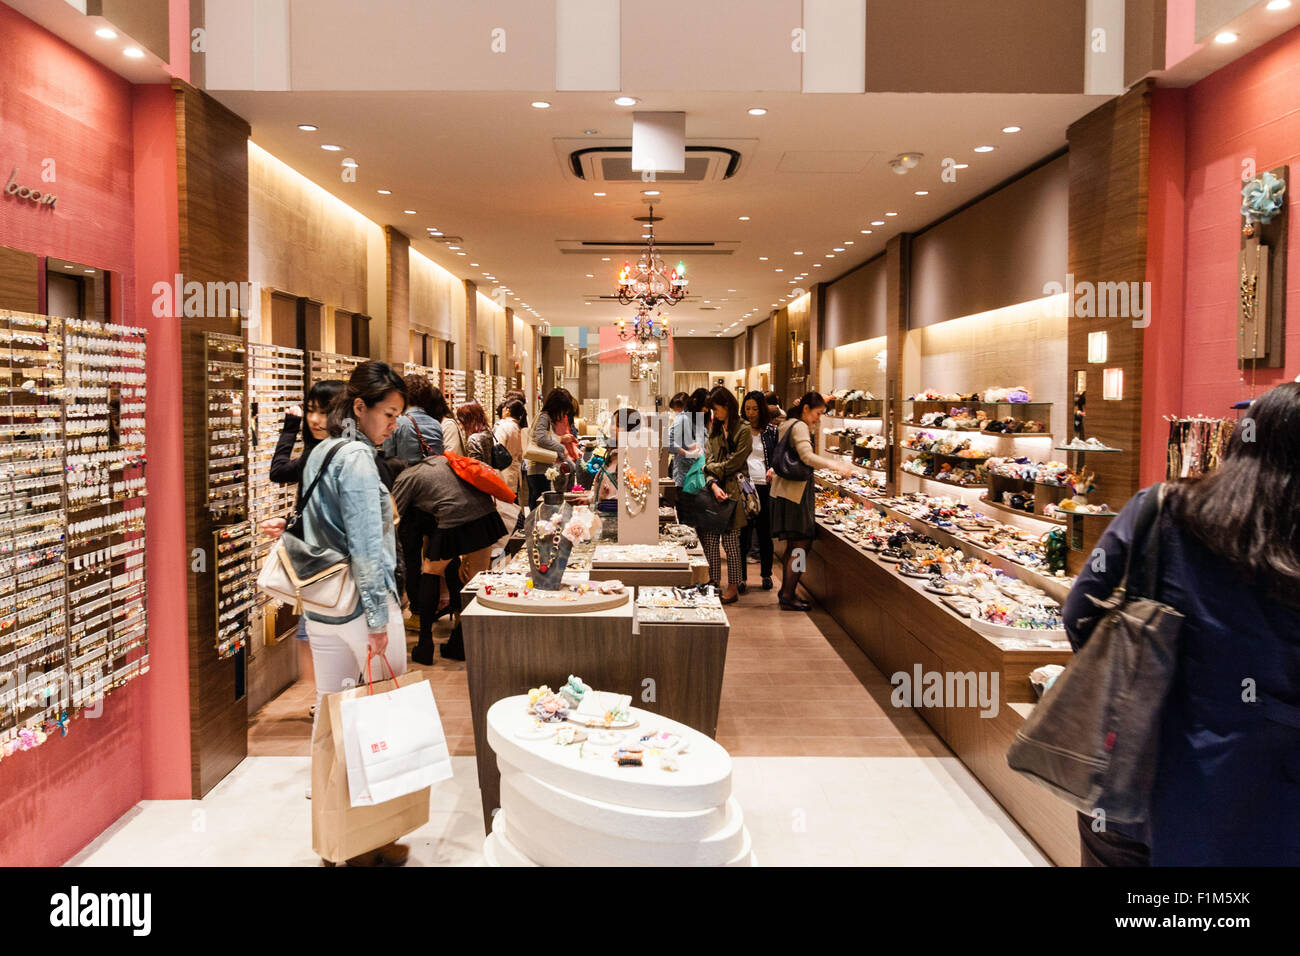 Japan, Osaka, Dotonbori. Interior of women's accessory boutique. View along inside narrow store, with central display and customers shopping Stock Photo - Alamy